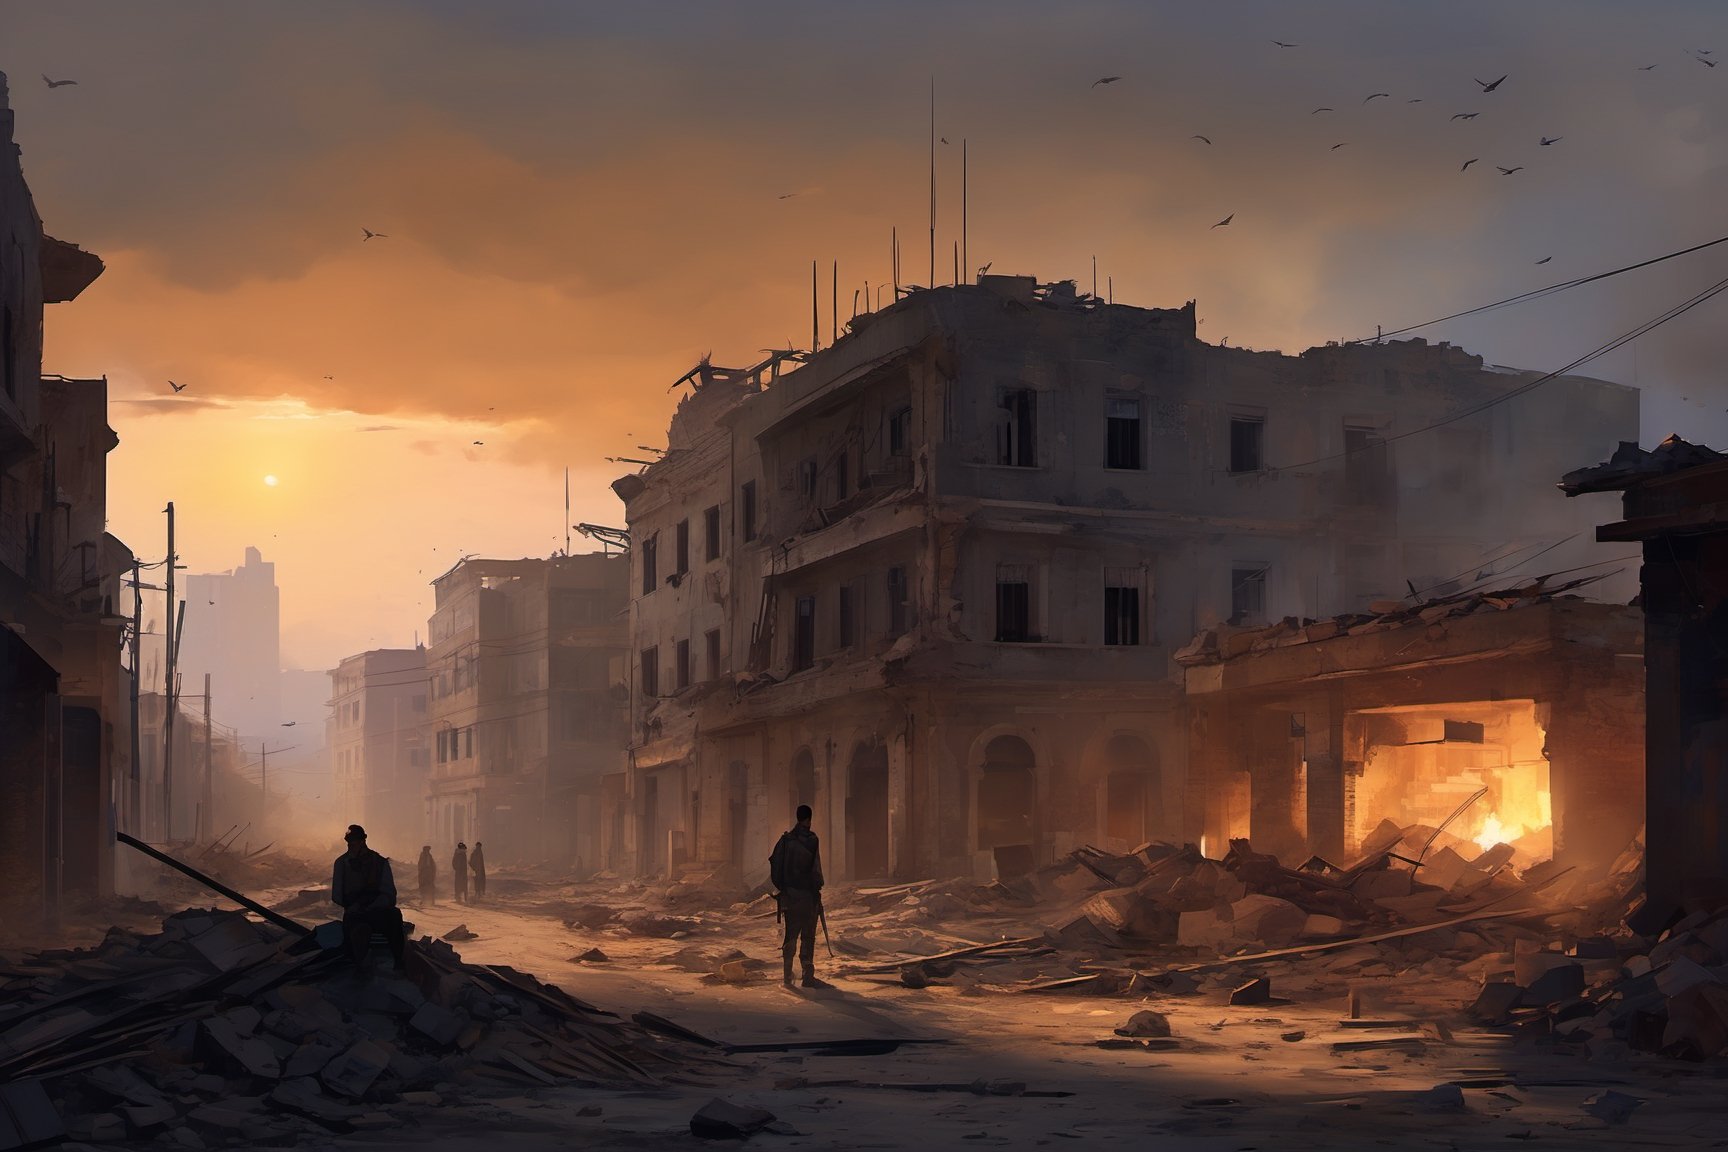 
Victims of war, a war-torn city at dusk, a resilient group of survivors rebuilding, amidst ruins and debris, a somber yet hopeful atmosphere, dim ambient lighting, capturing the essence of resilience and rebuilding, a skilled digital artist, blending realism and stylized elements, digital painting, illustrative style, emotional storytelling, warm color scheme with muted tones, computer graphics with attention to detail, high-quality production, evoking a sense of hope in adversity.